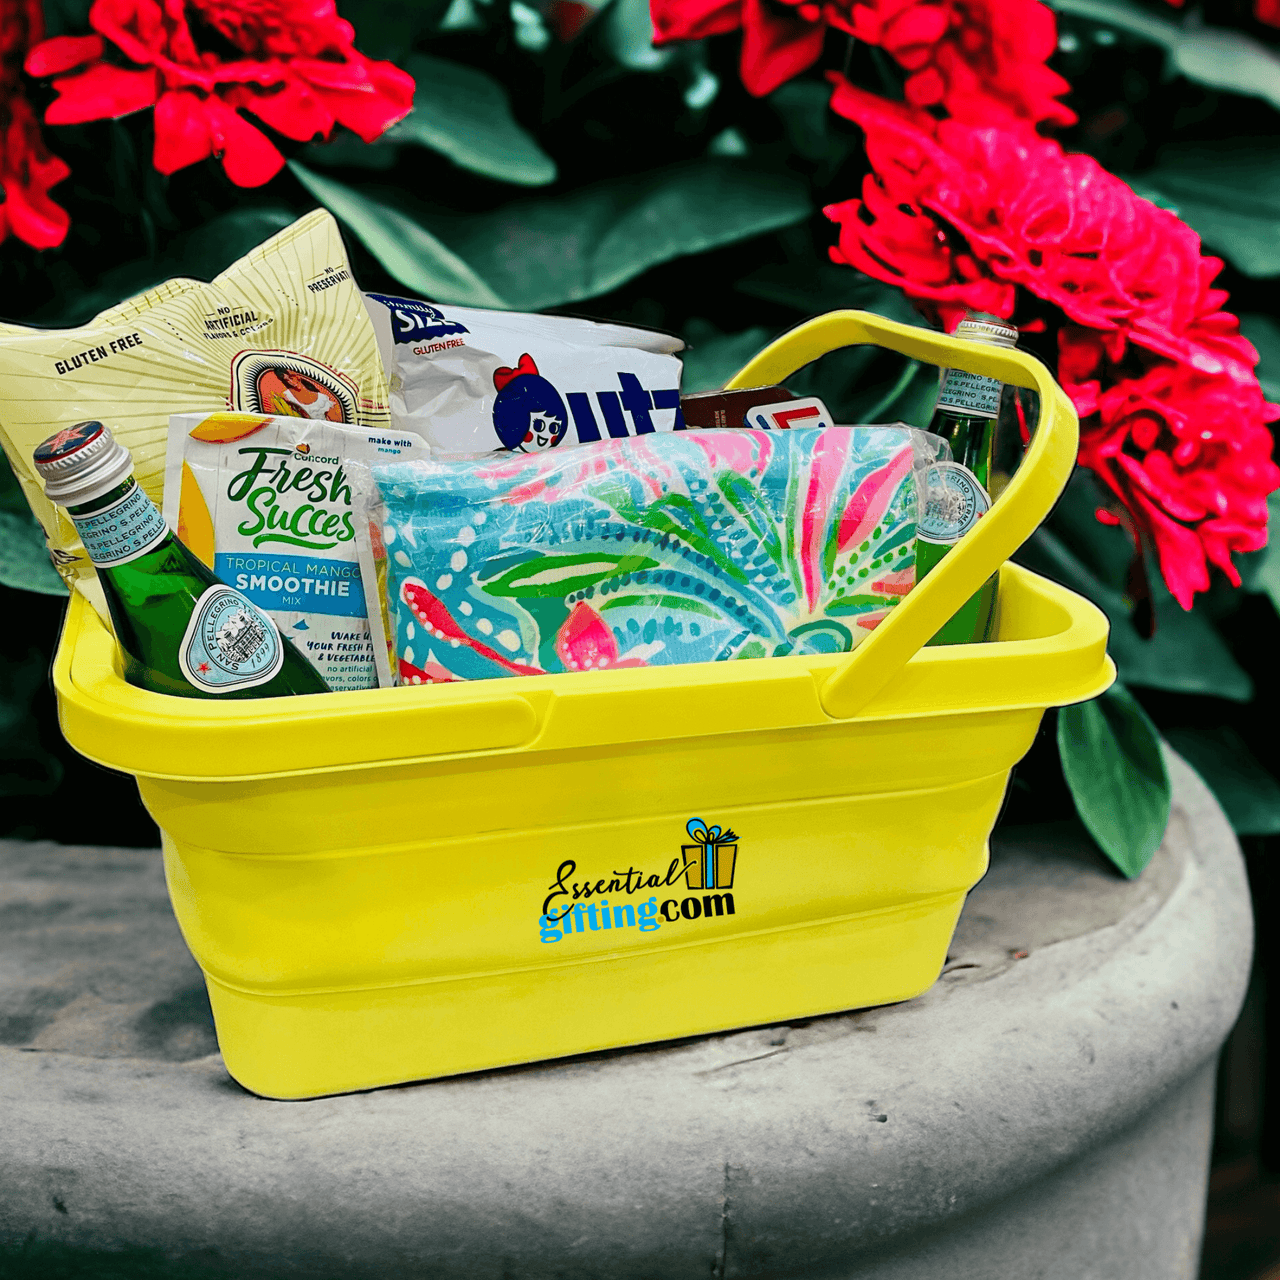 Personalized Lifestyle Box: An assortment of practical essentials nestled in a vibrant yellow gift basket, surrounded by lush red blooms.